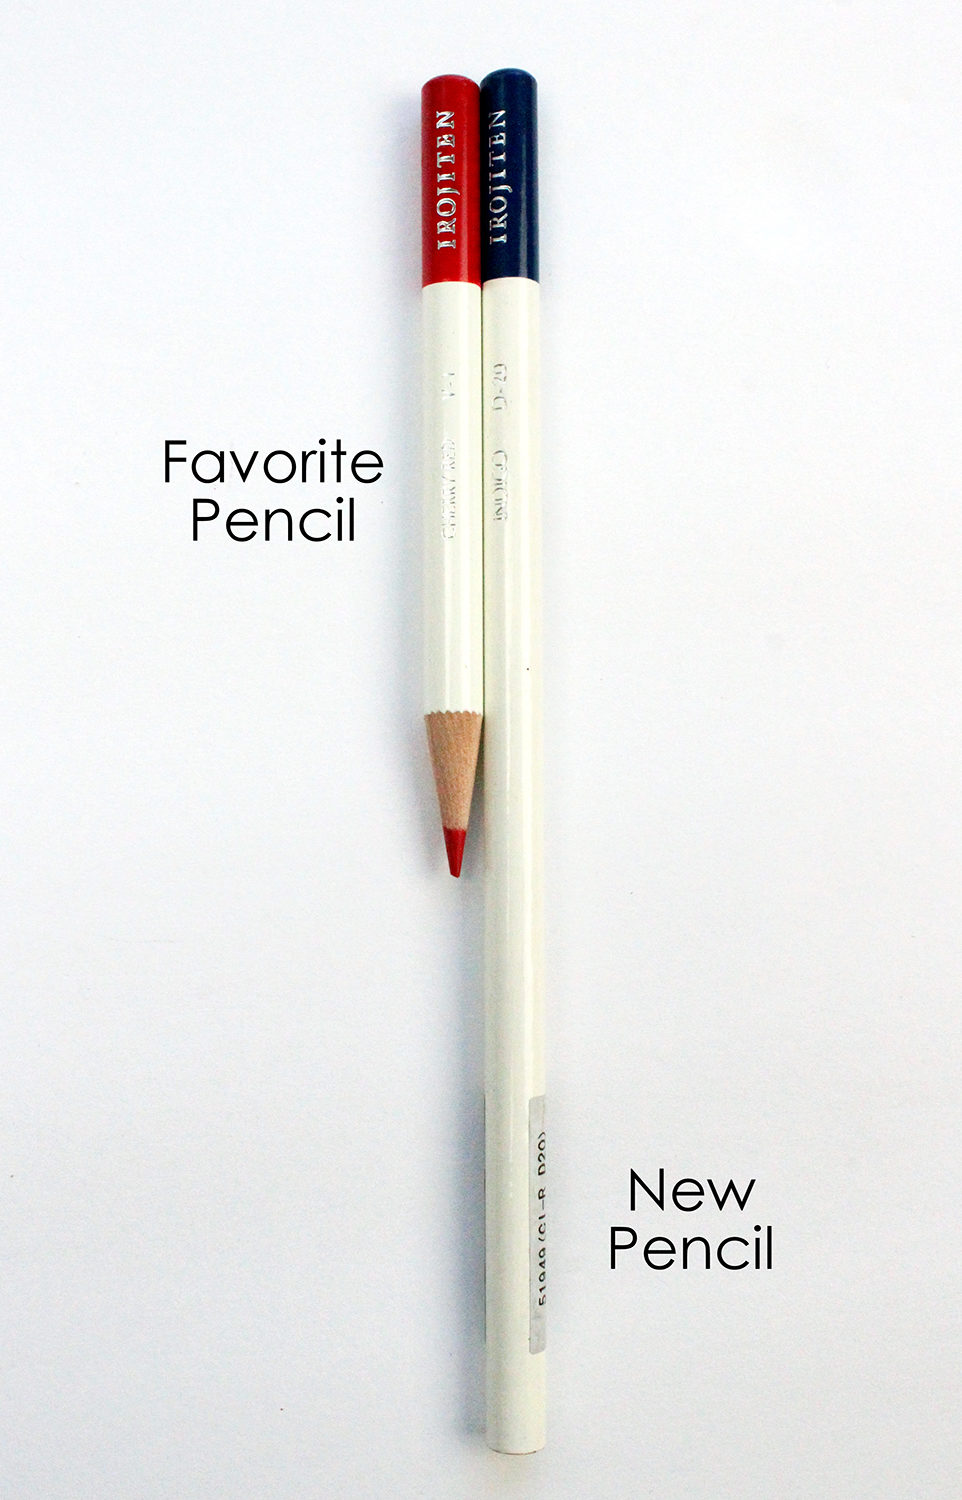 My Top 5 Budget Colored Pencils  The Best Top 5 Budget Colored